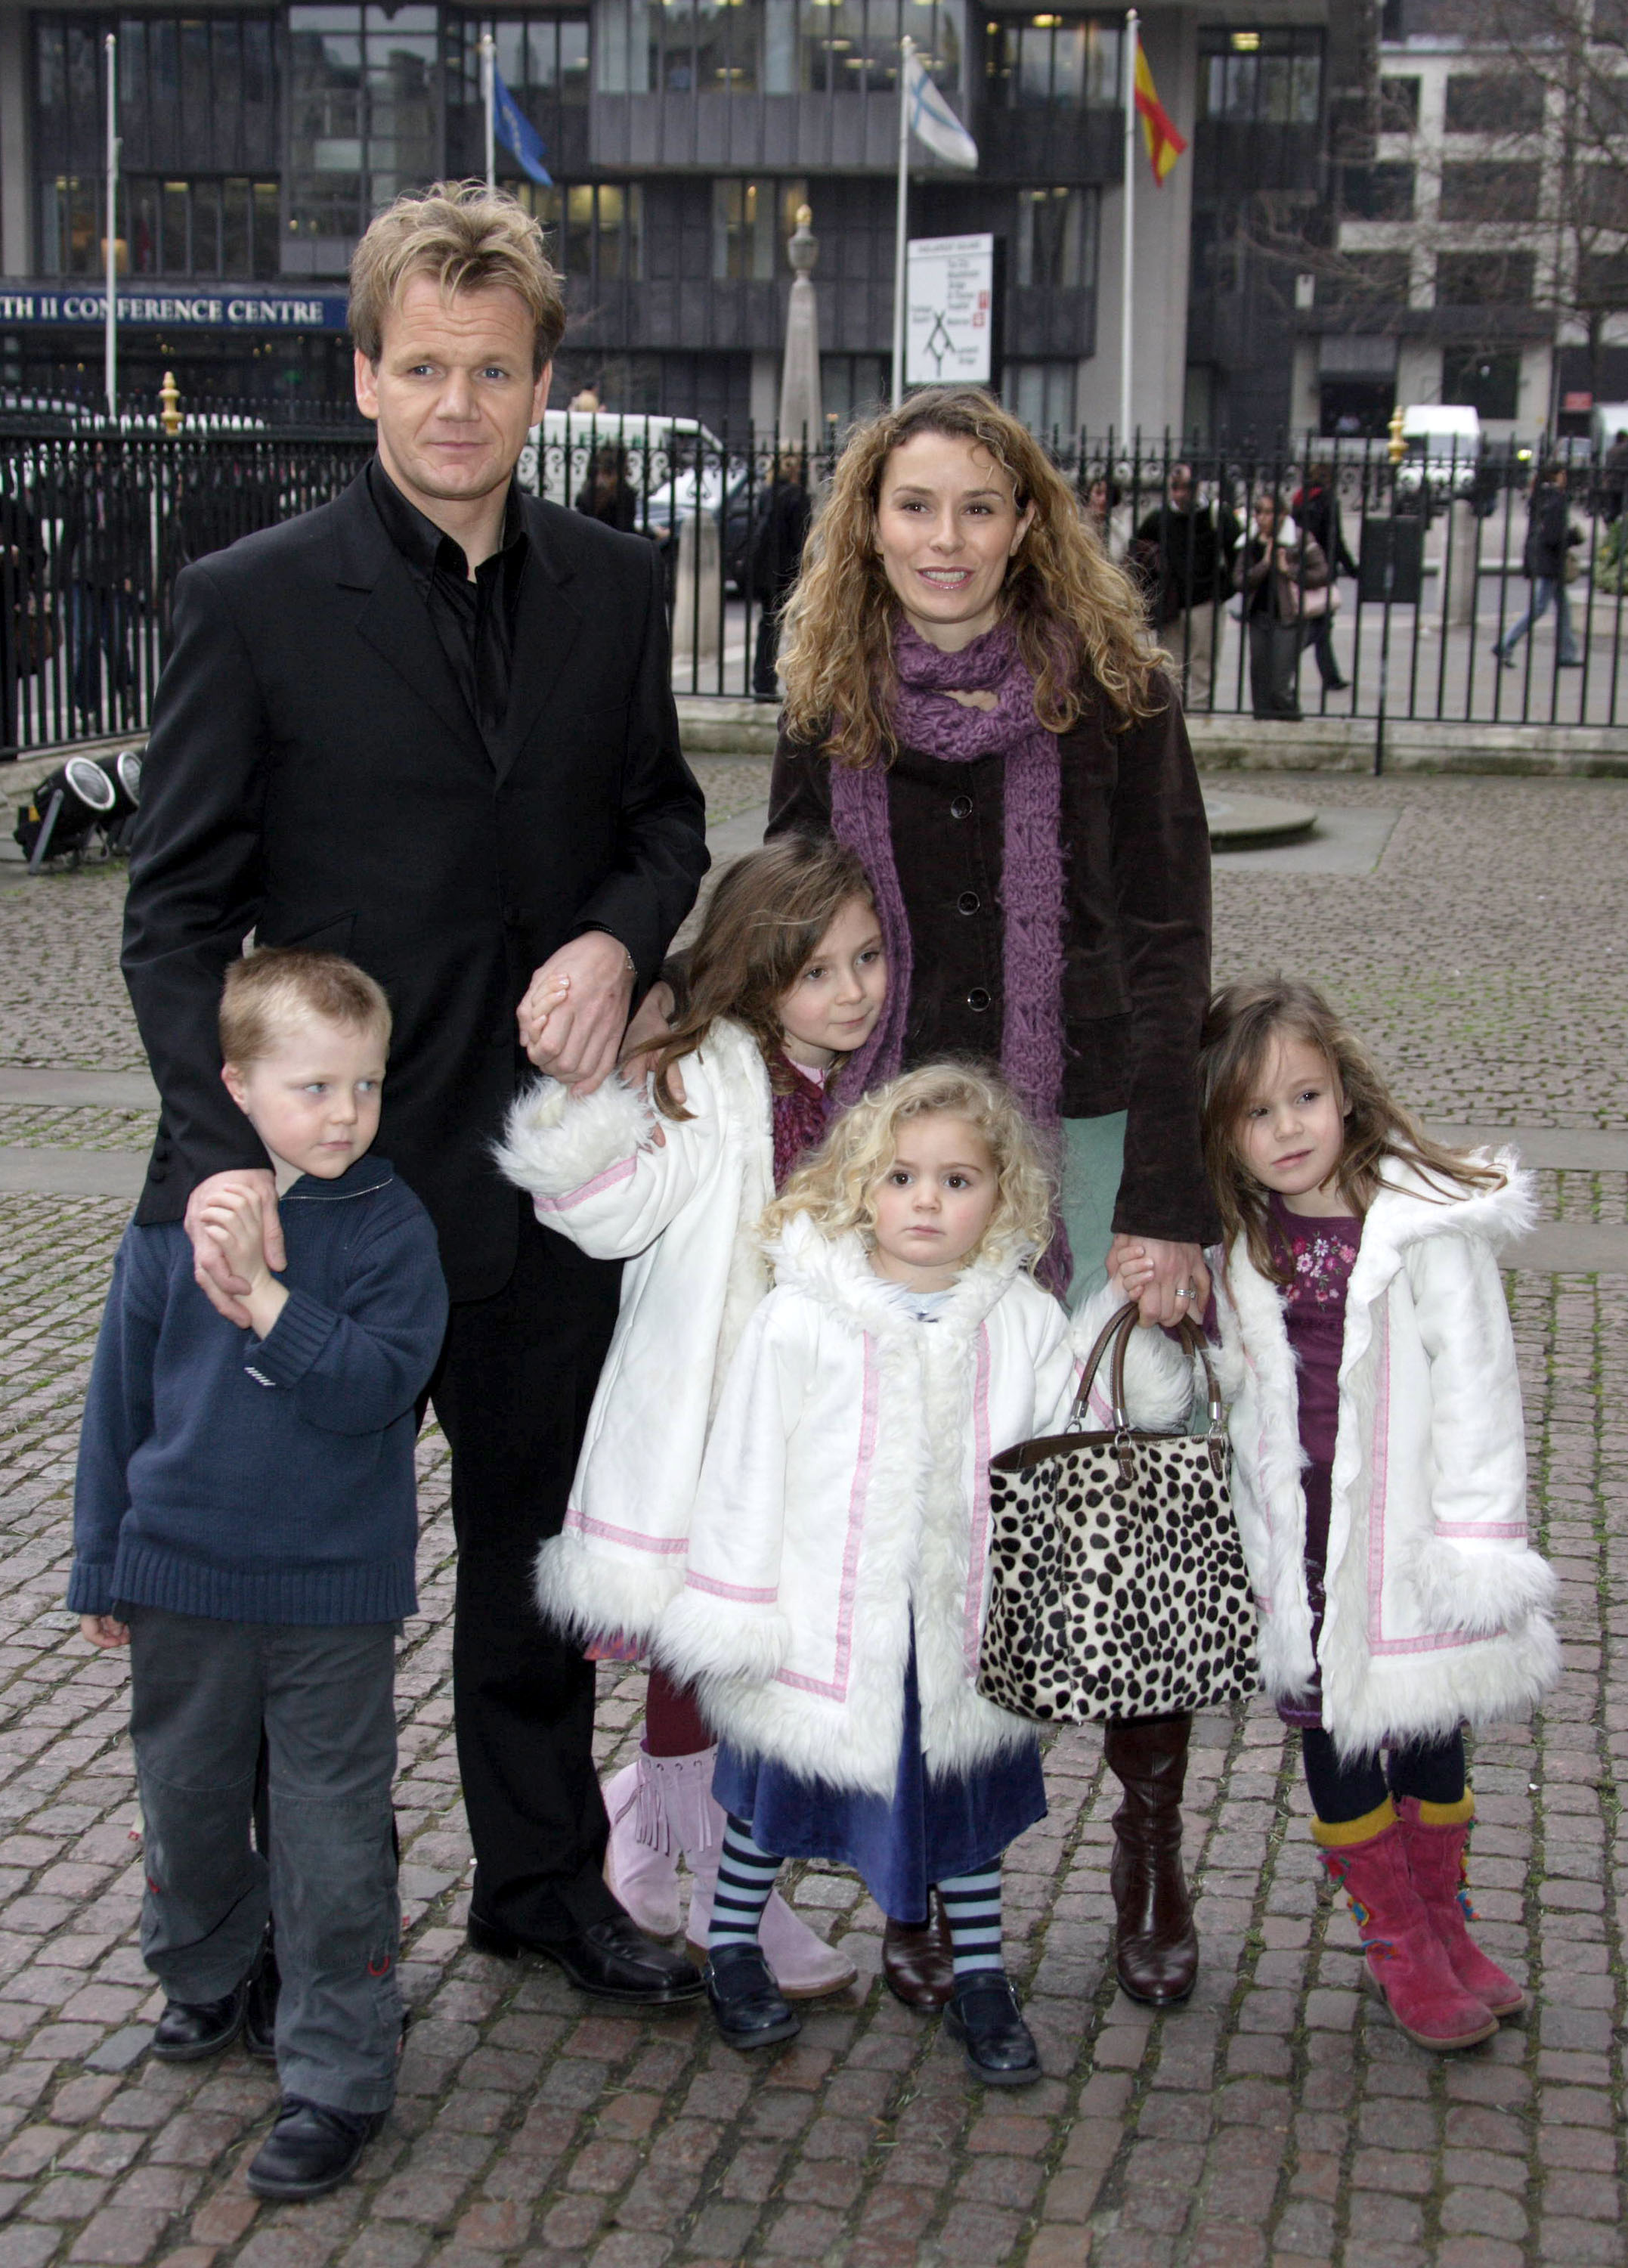 Jack Ramsay, Gordon Ramsay, Megan Ramsay, Tana Ramsay, Matilda Ramsay and Holly Ramsay at the Woman's Own Children of Courage 2004 on December 15, 2005 | Source: Getty Images